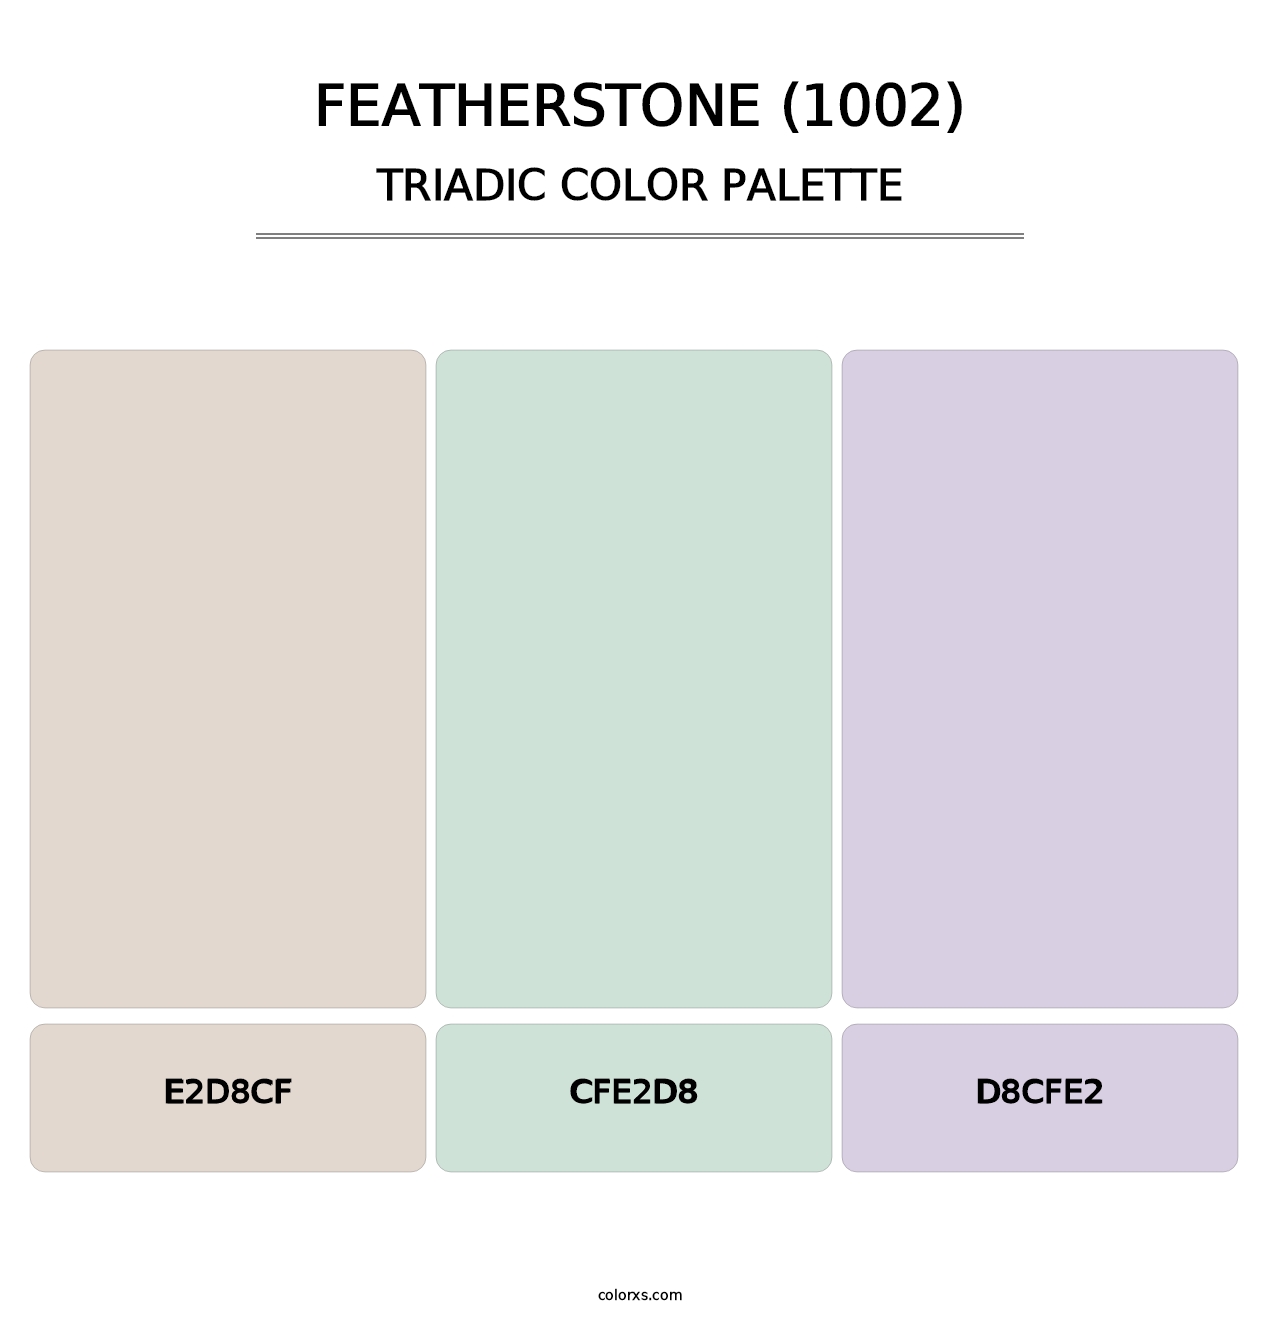 Featherstone (1002) - Triadic Color Palette